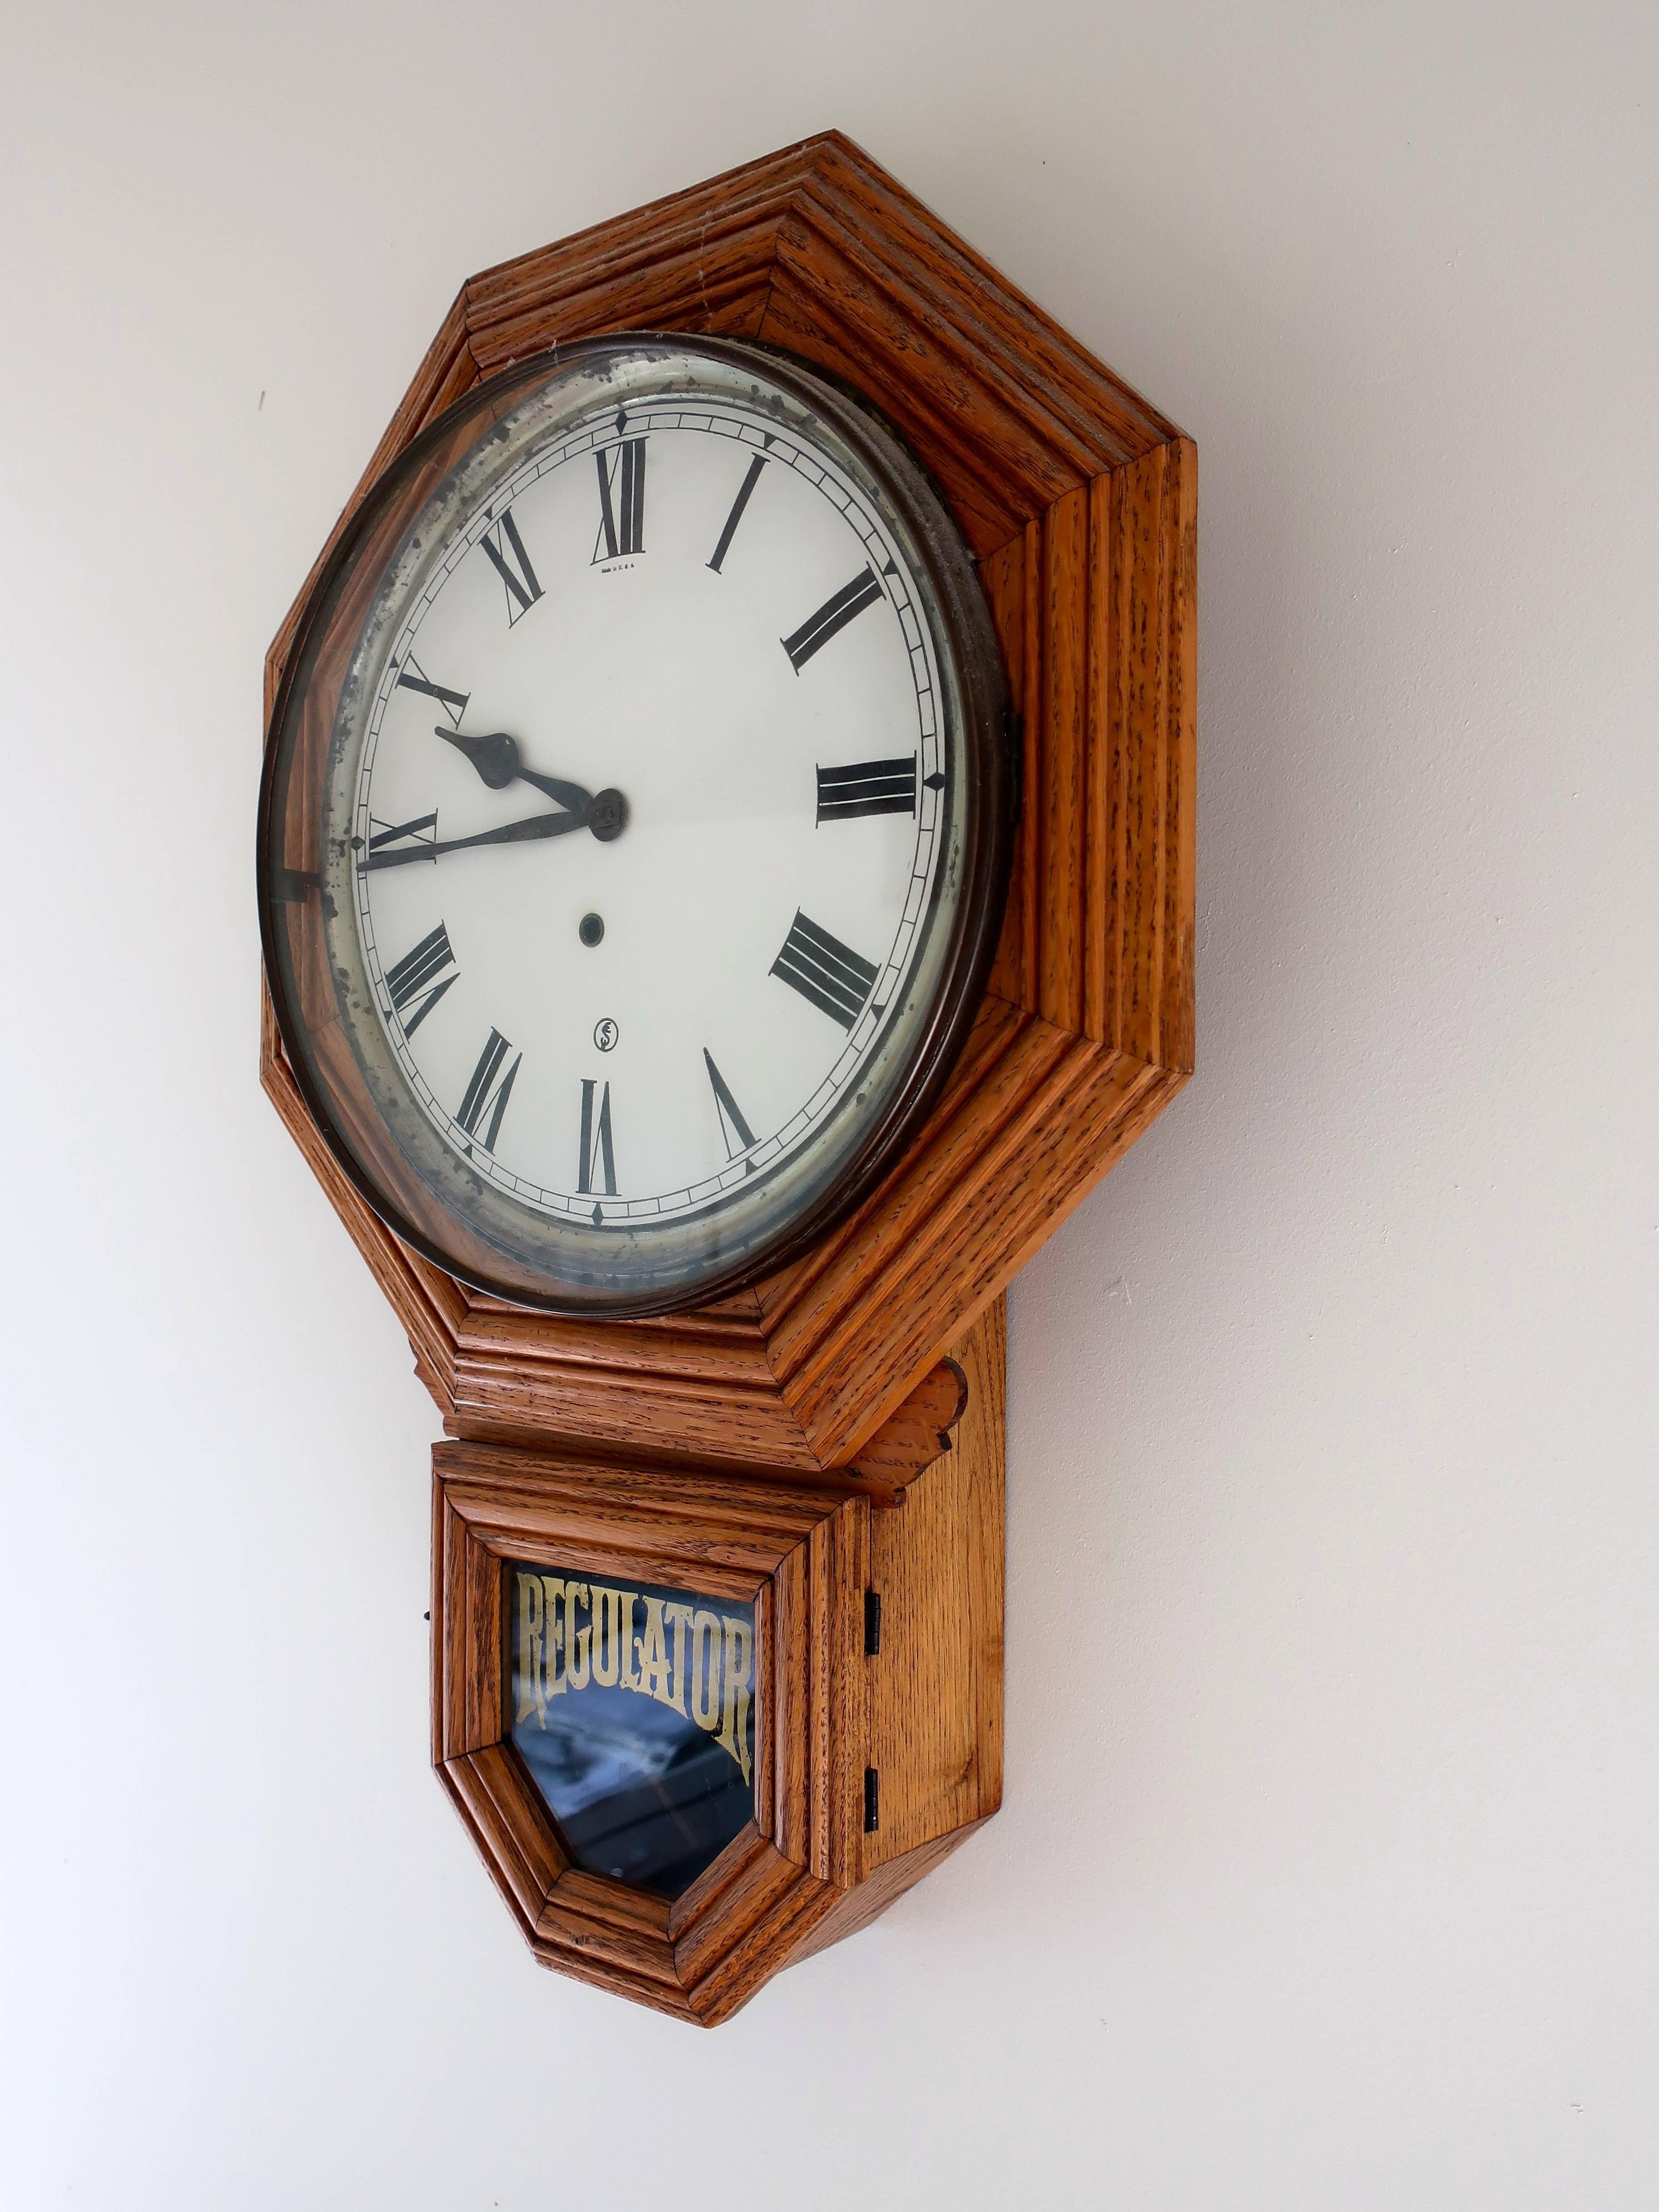 Vintage oak wall clock by Regulator, made in the USA. The clock is complete and has the original finish and clock key.